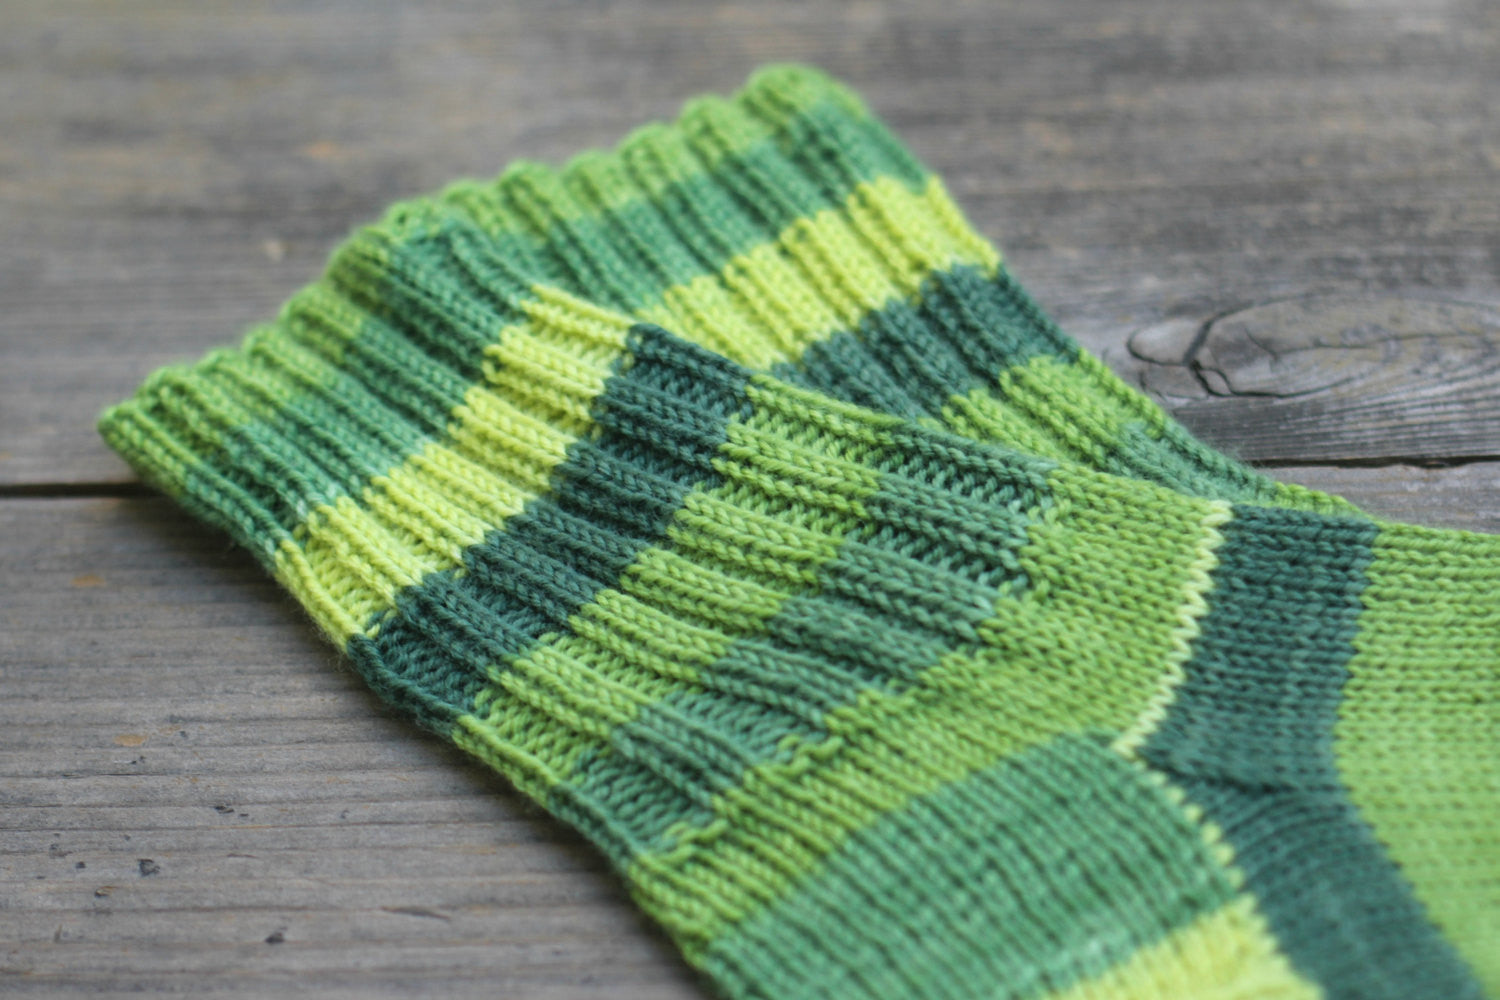 Knit green socks made with striped wool for women - KGThreads